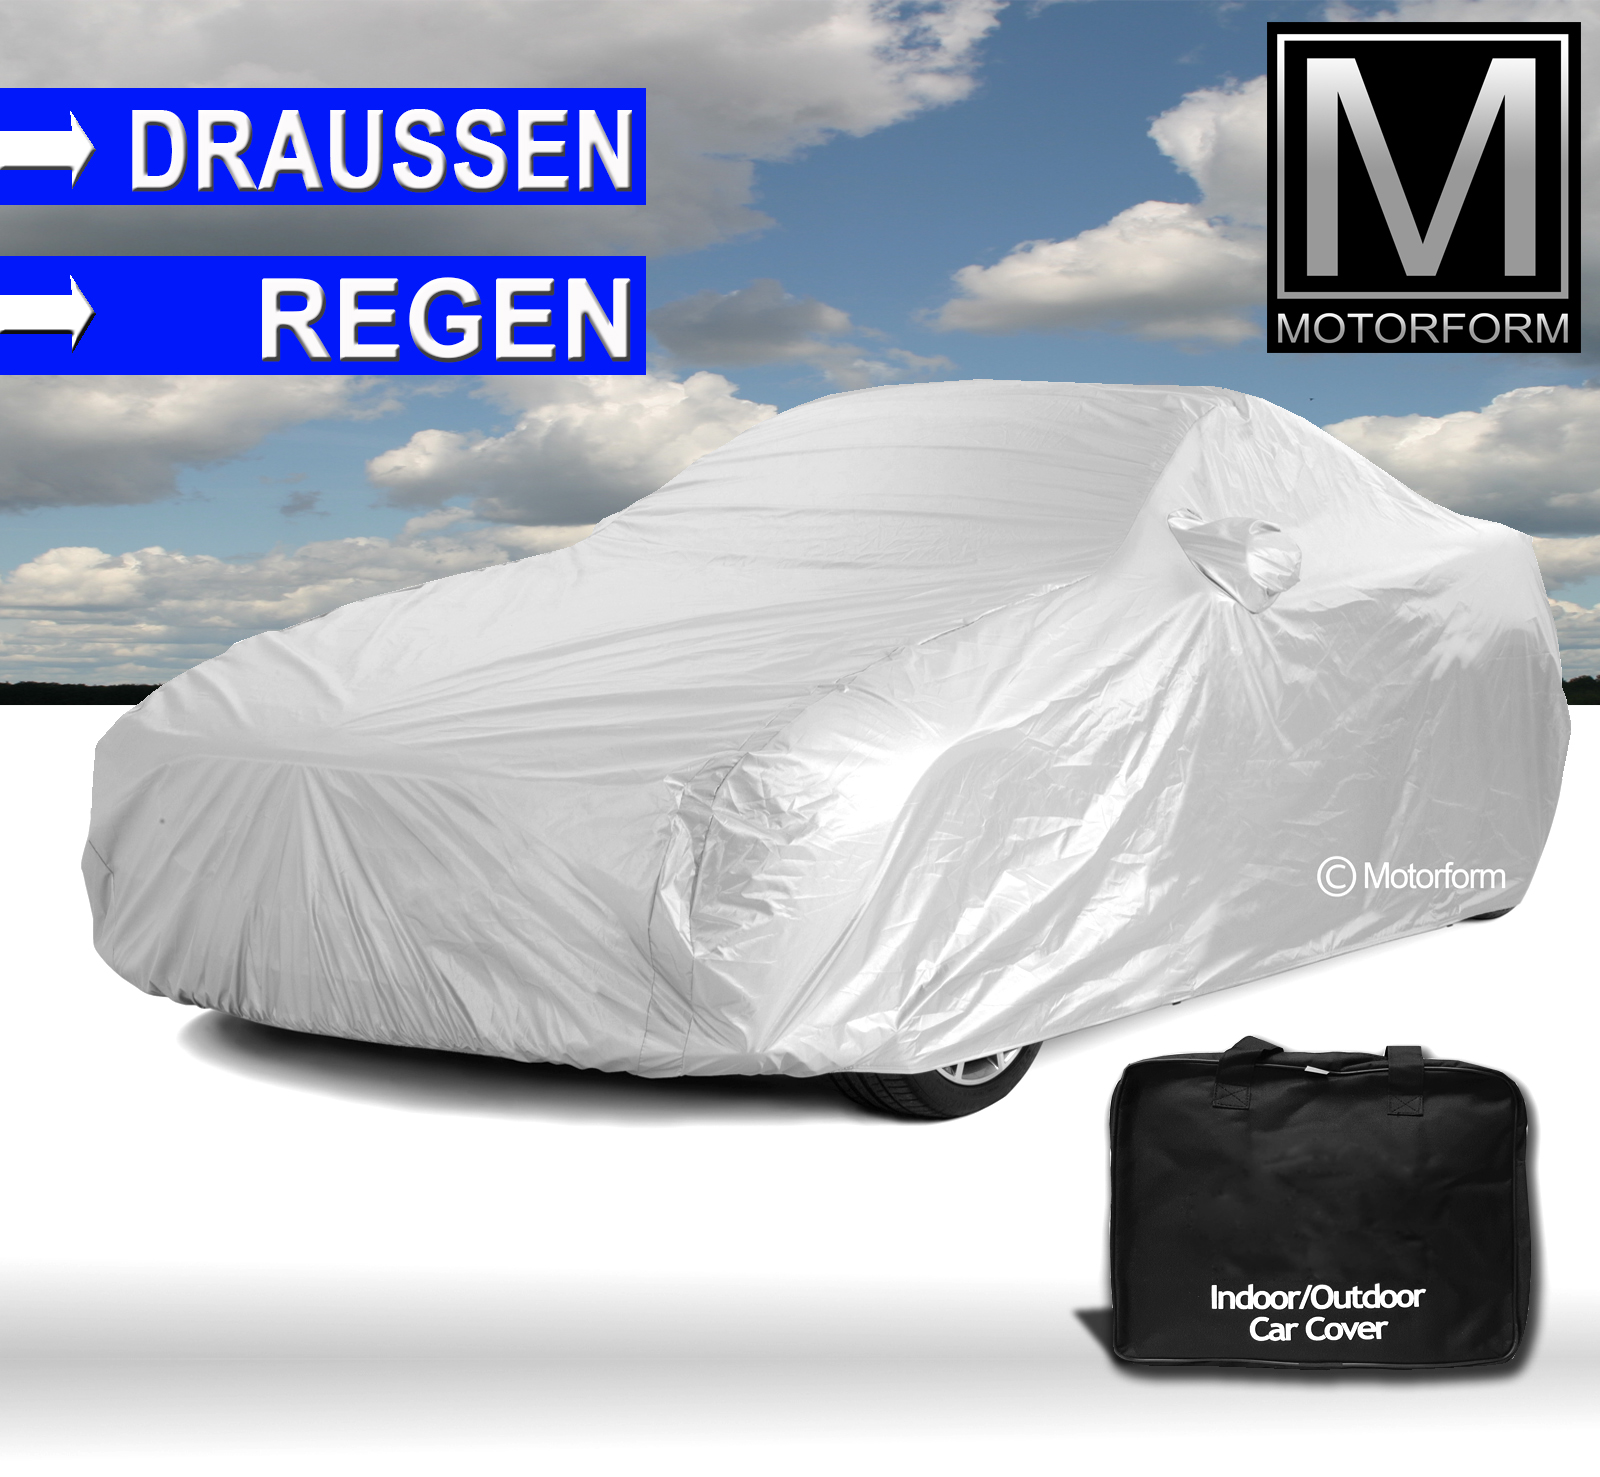 Voyager Outdoor Car Cover for Bentley Arnage (1998-)